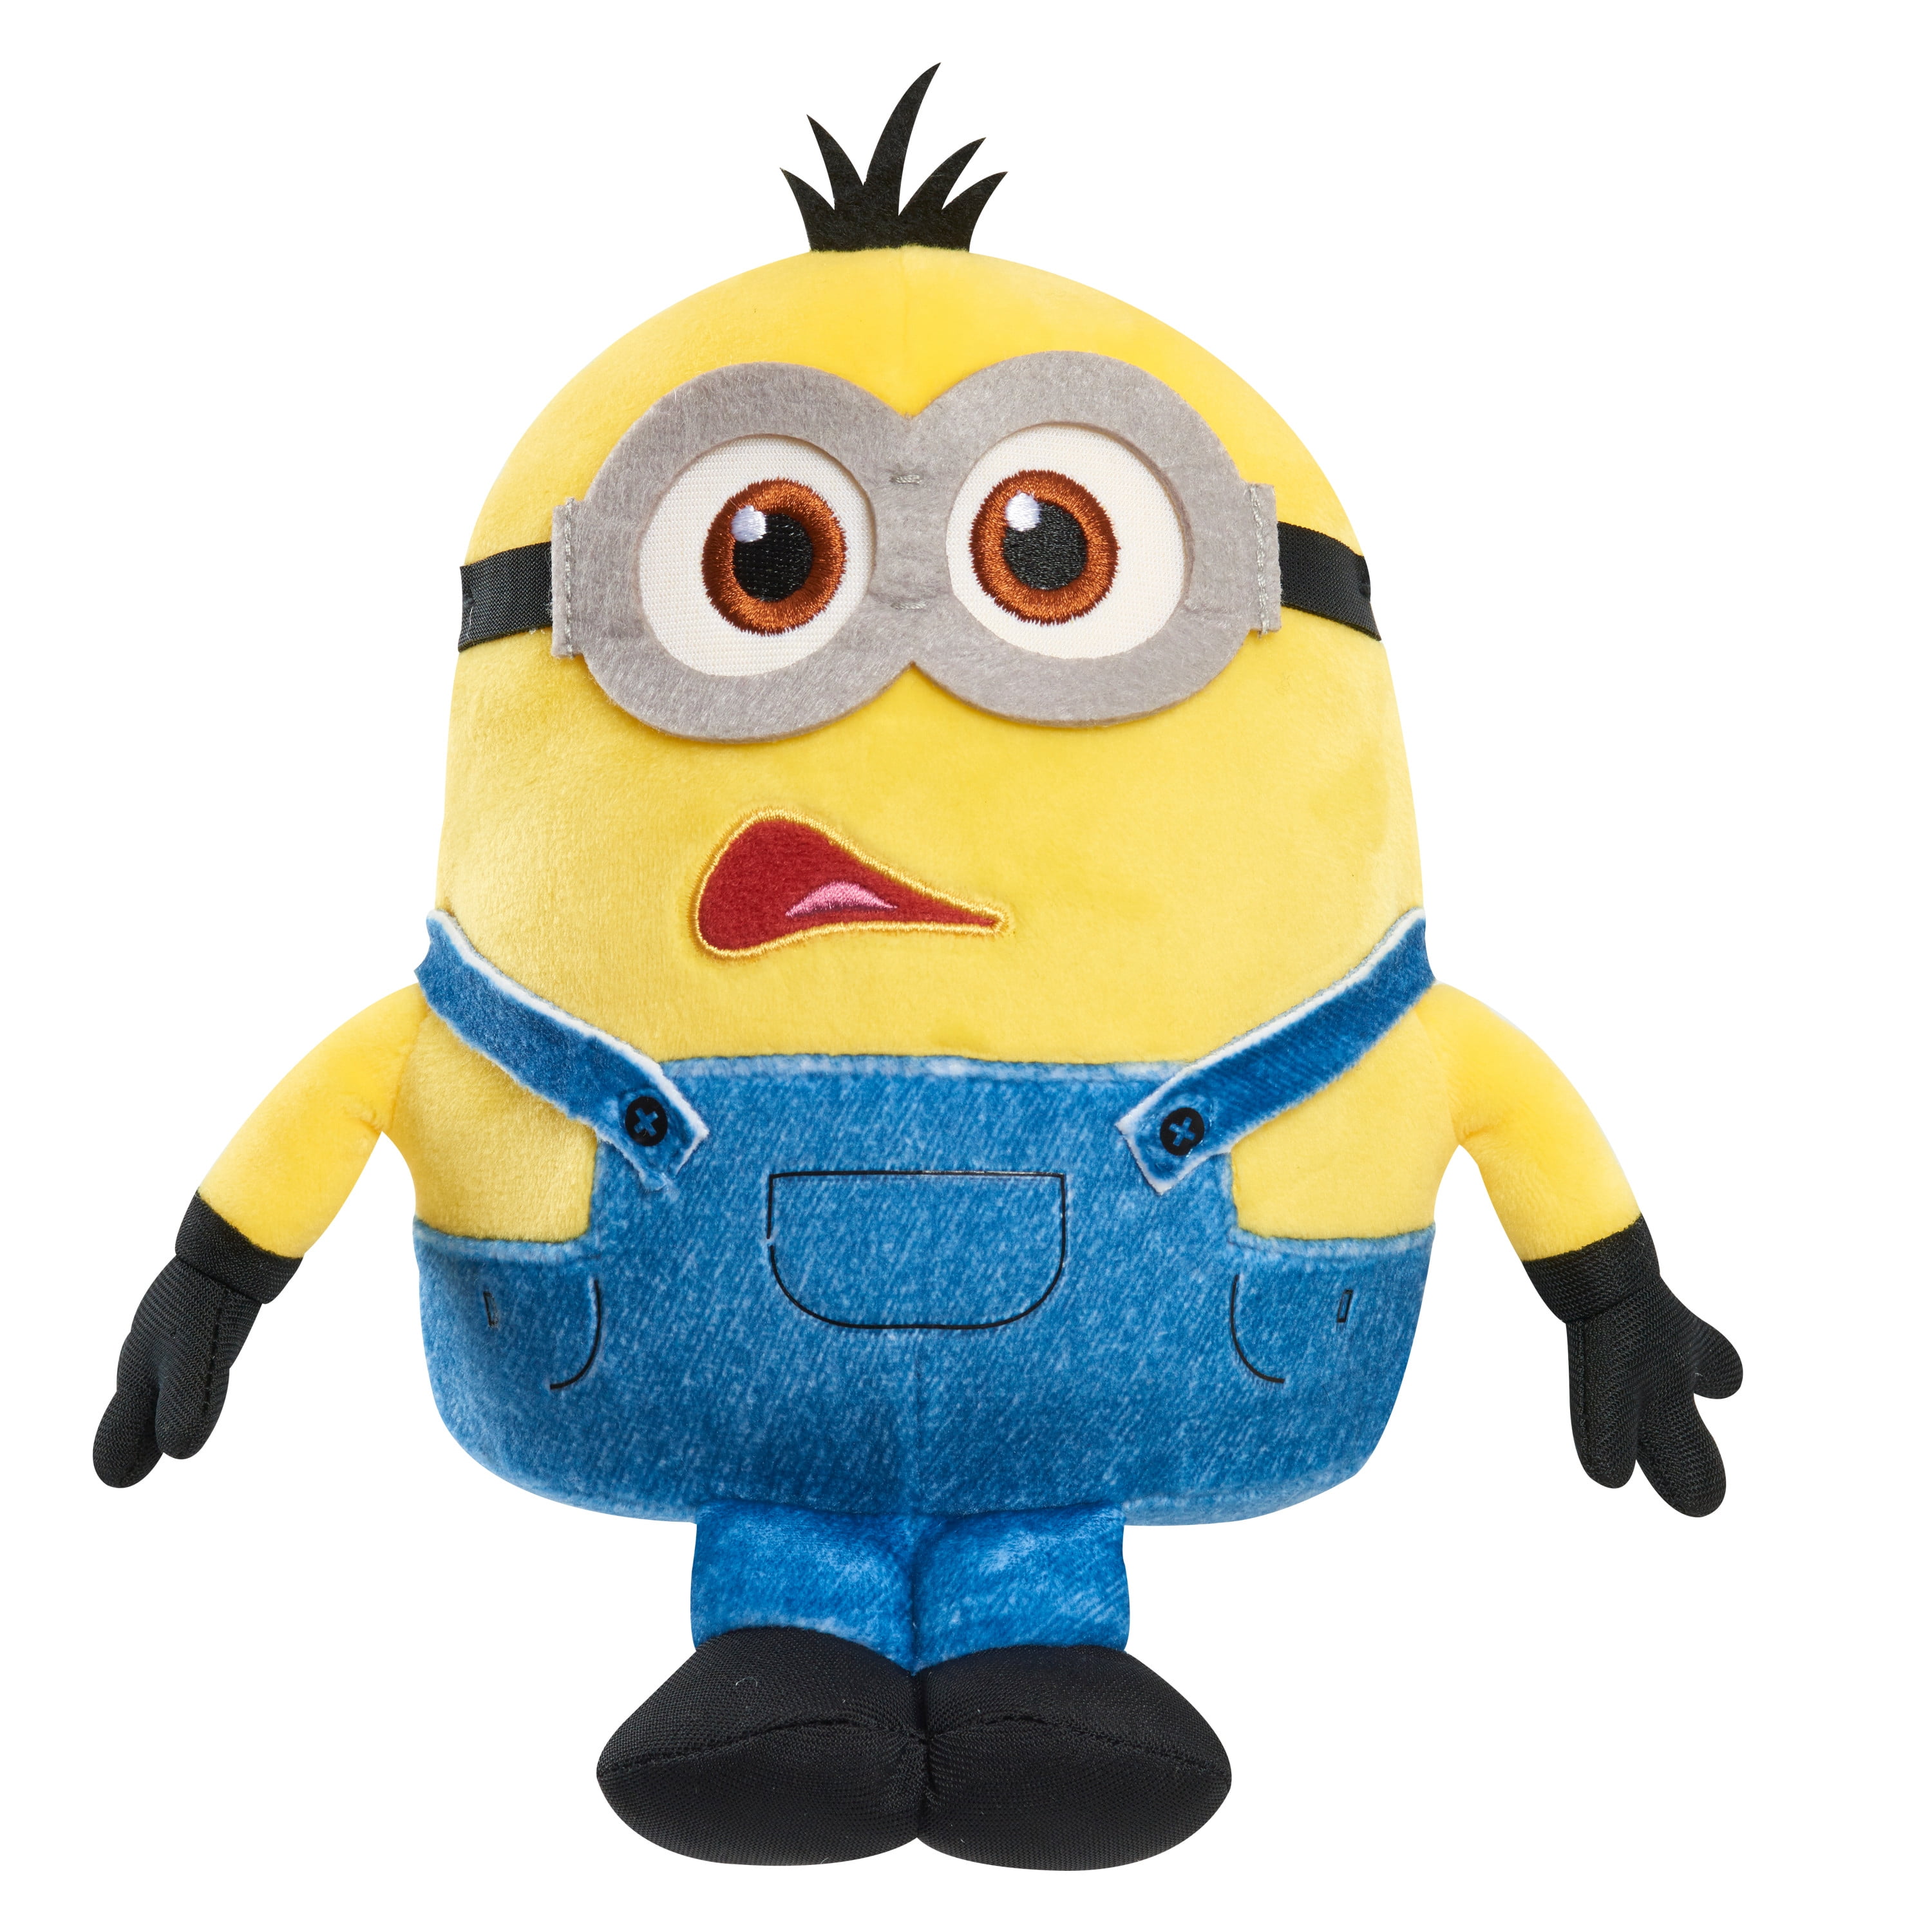 Despicable Me 3 Character Minion Plush Soft Toy Stuffed Animal Doll Teddy Figure 